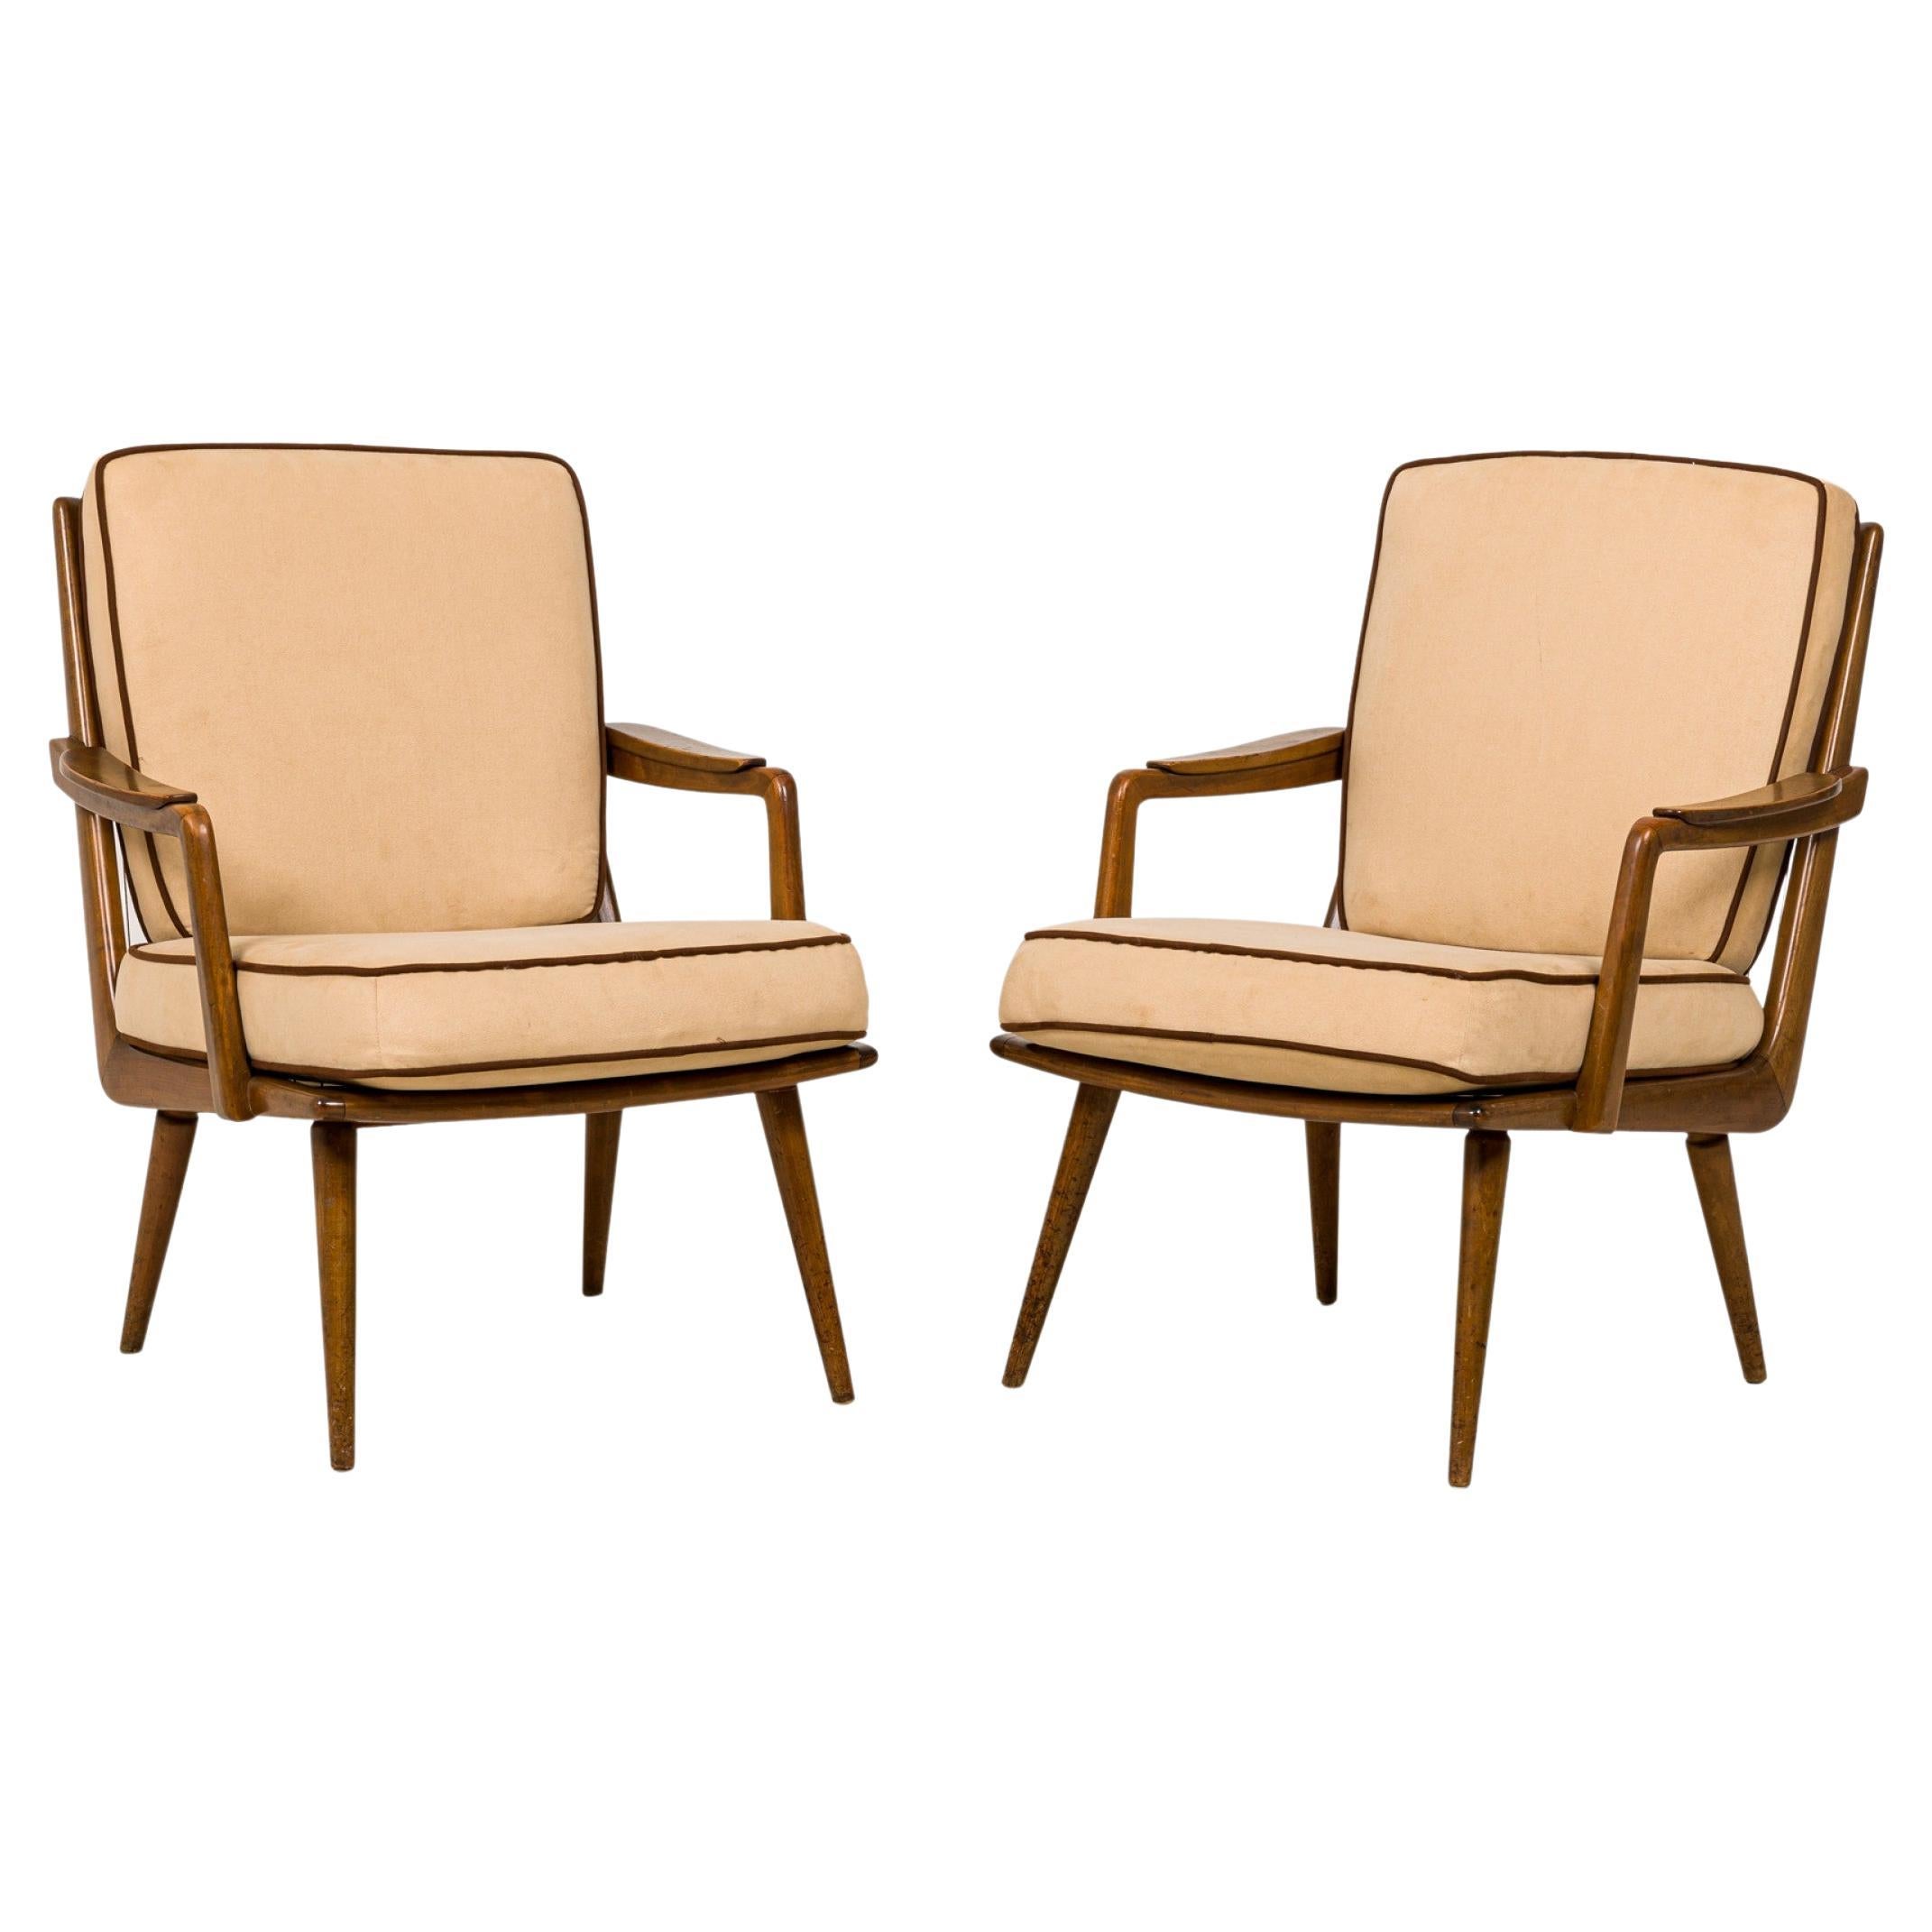 Pair of Walnut and Beige Fabric Upholstered Petite Lounge / Armchairs For Sale